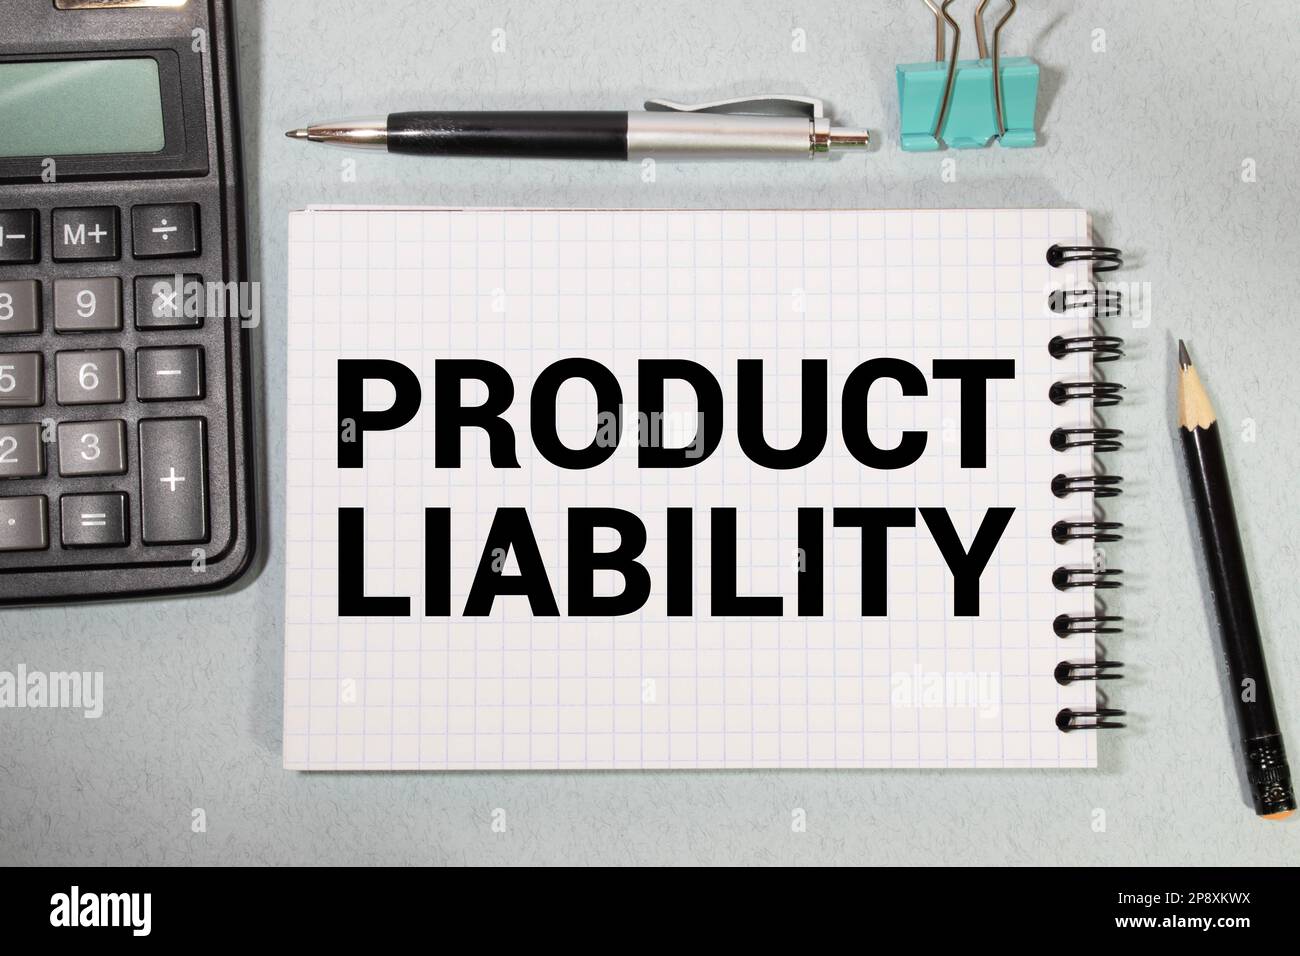 Product Liability is shown on the photo using the text. Stock Photo